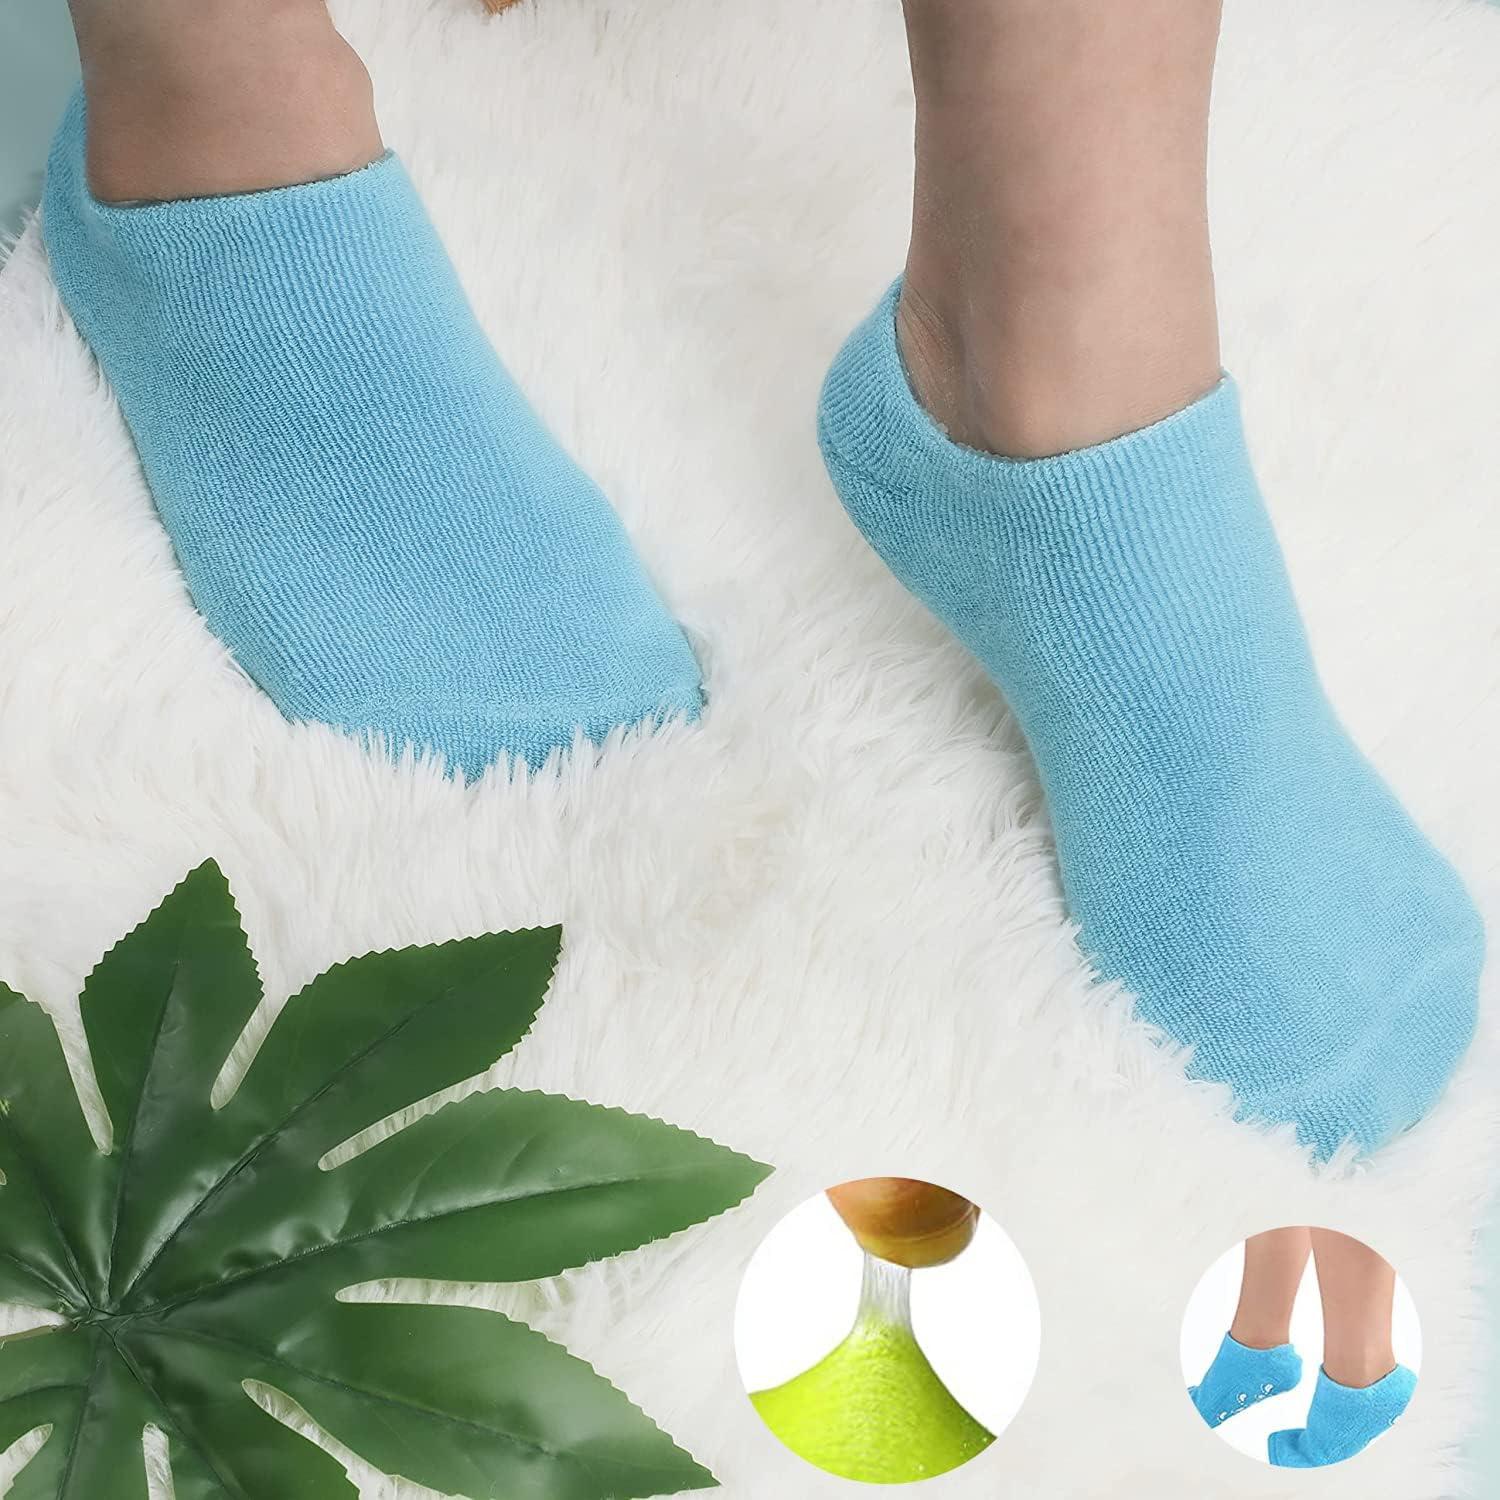 2 Pairs Moisturizing Socks, WalTok Gel Socks Soft Moisturizing Gel Socks,  Gel Spa Socks for Repairing and Softening Dry Cracked Feet Skins, Gel  Lining Infused with Essential Oils and Vitamins 2 Piece